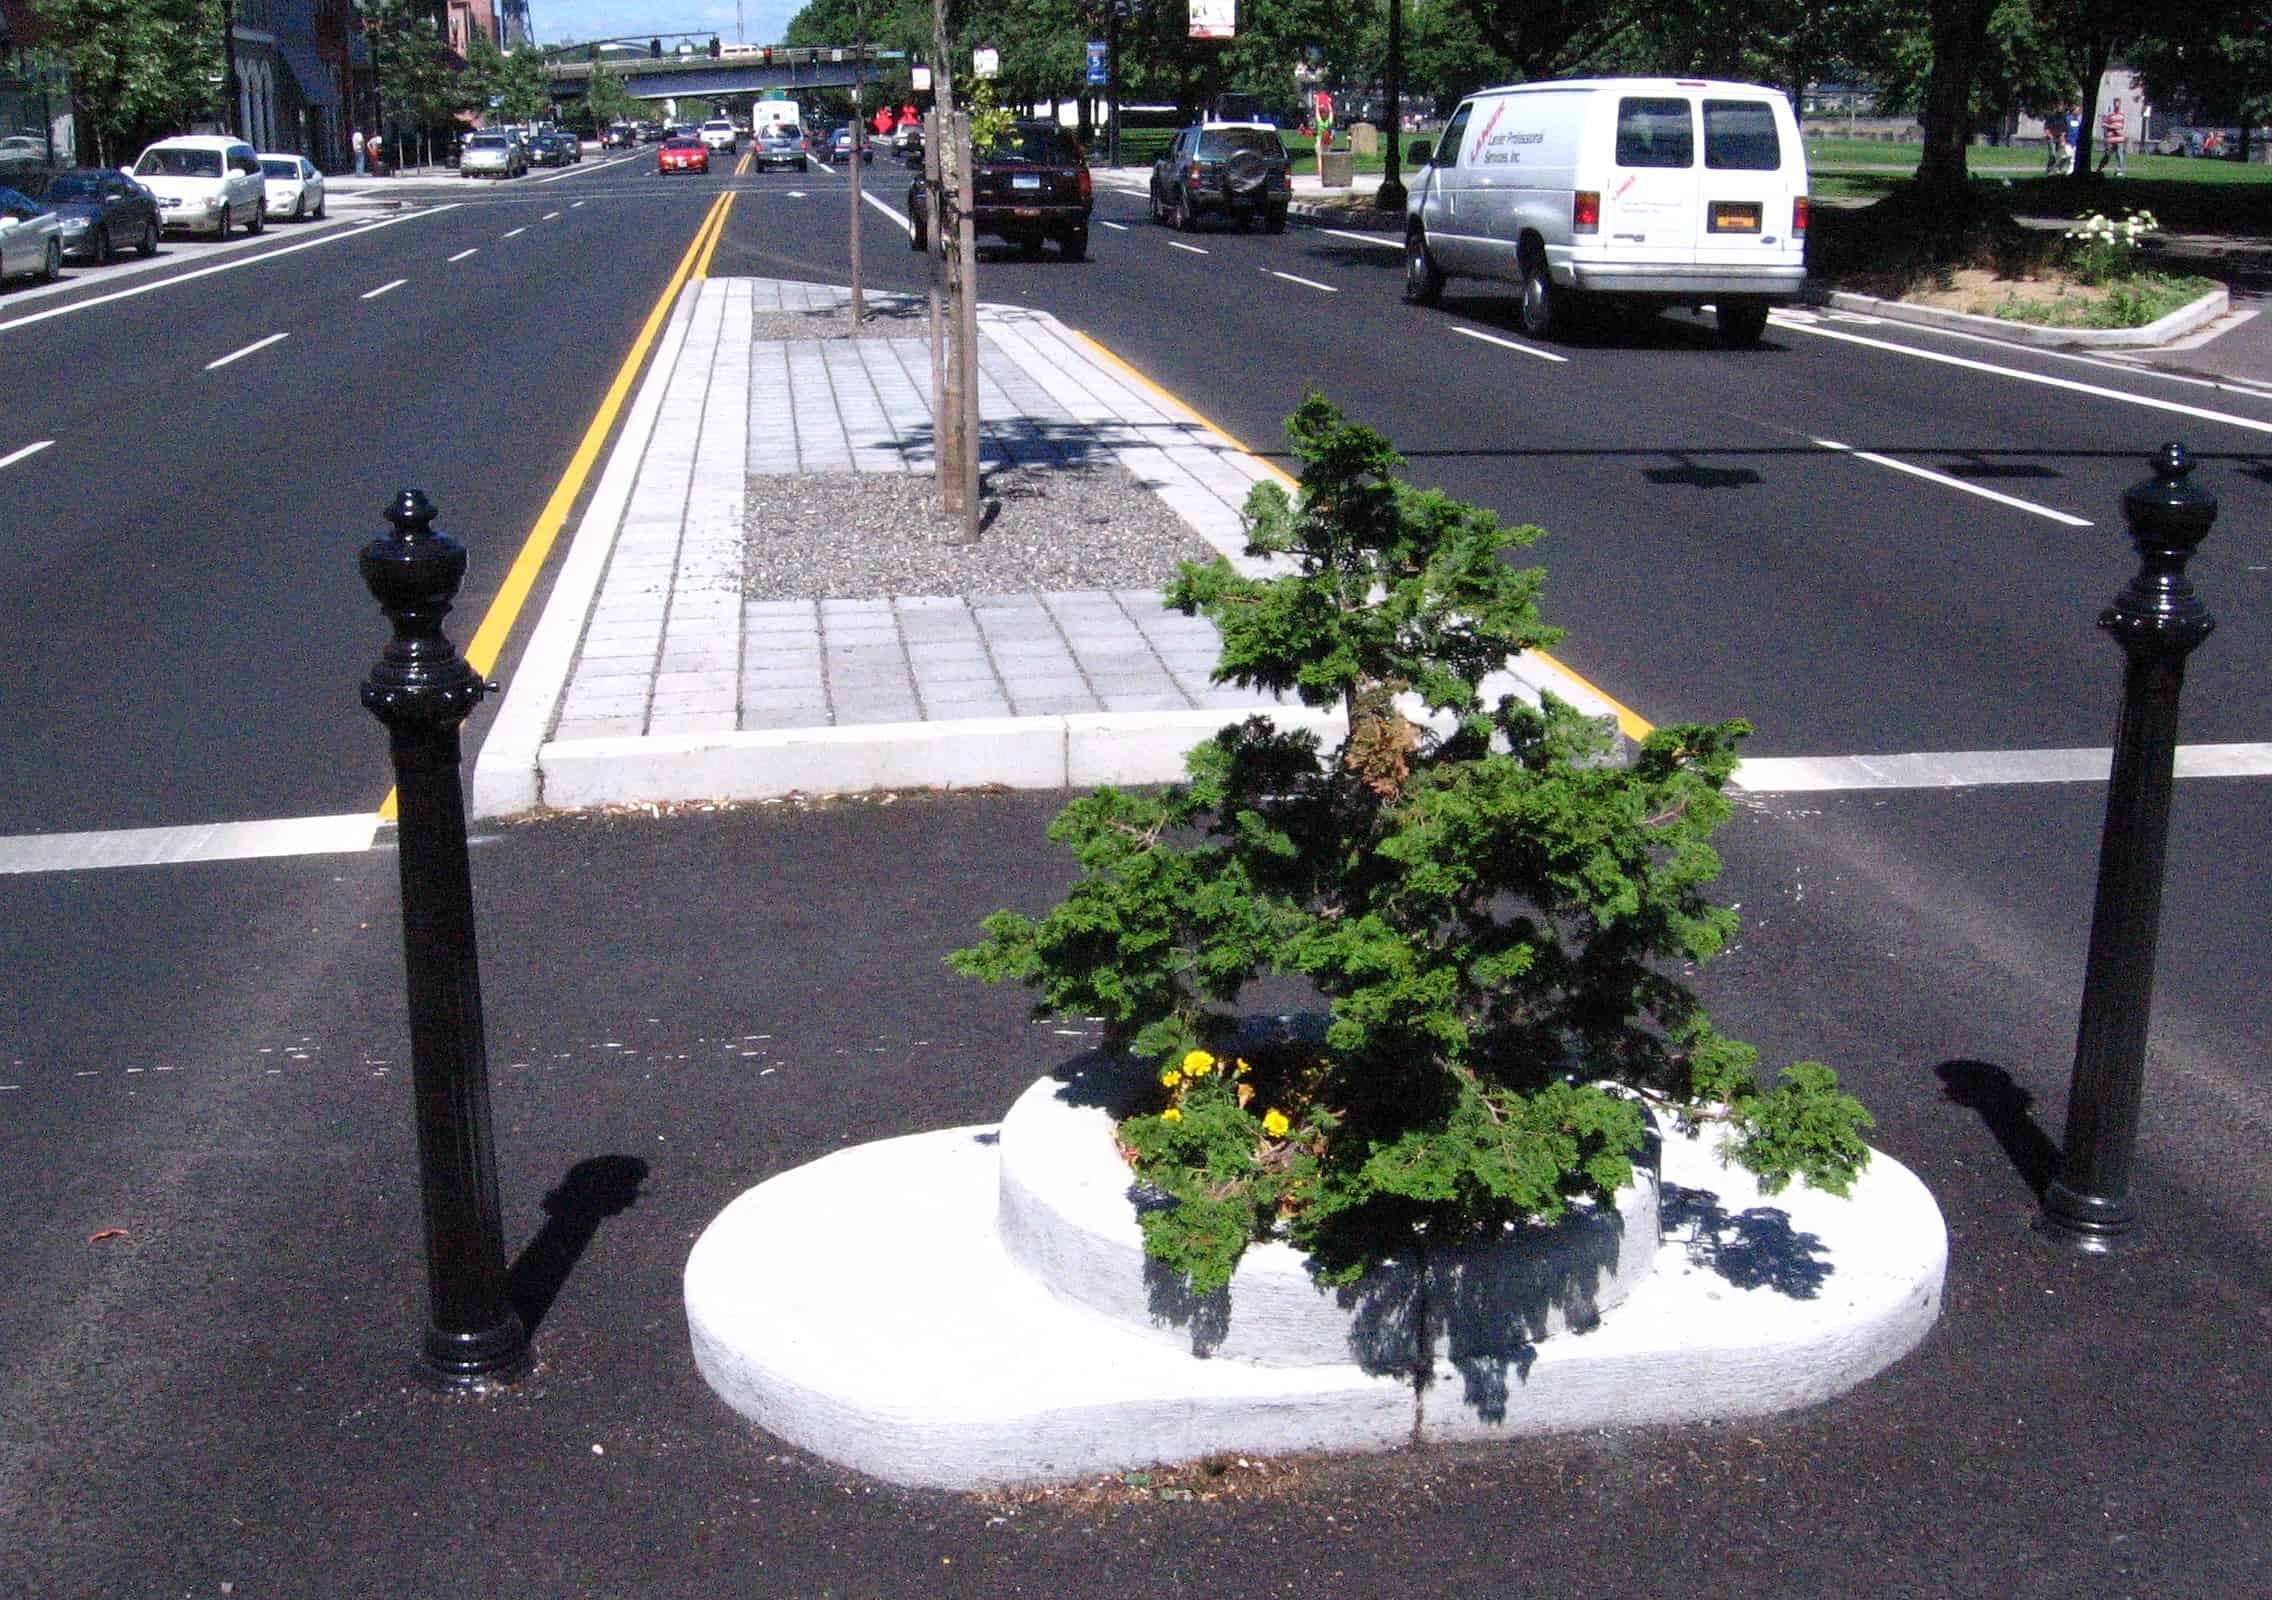 Mill Ends Park is the world's smallest park, located in Oregon.